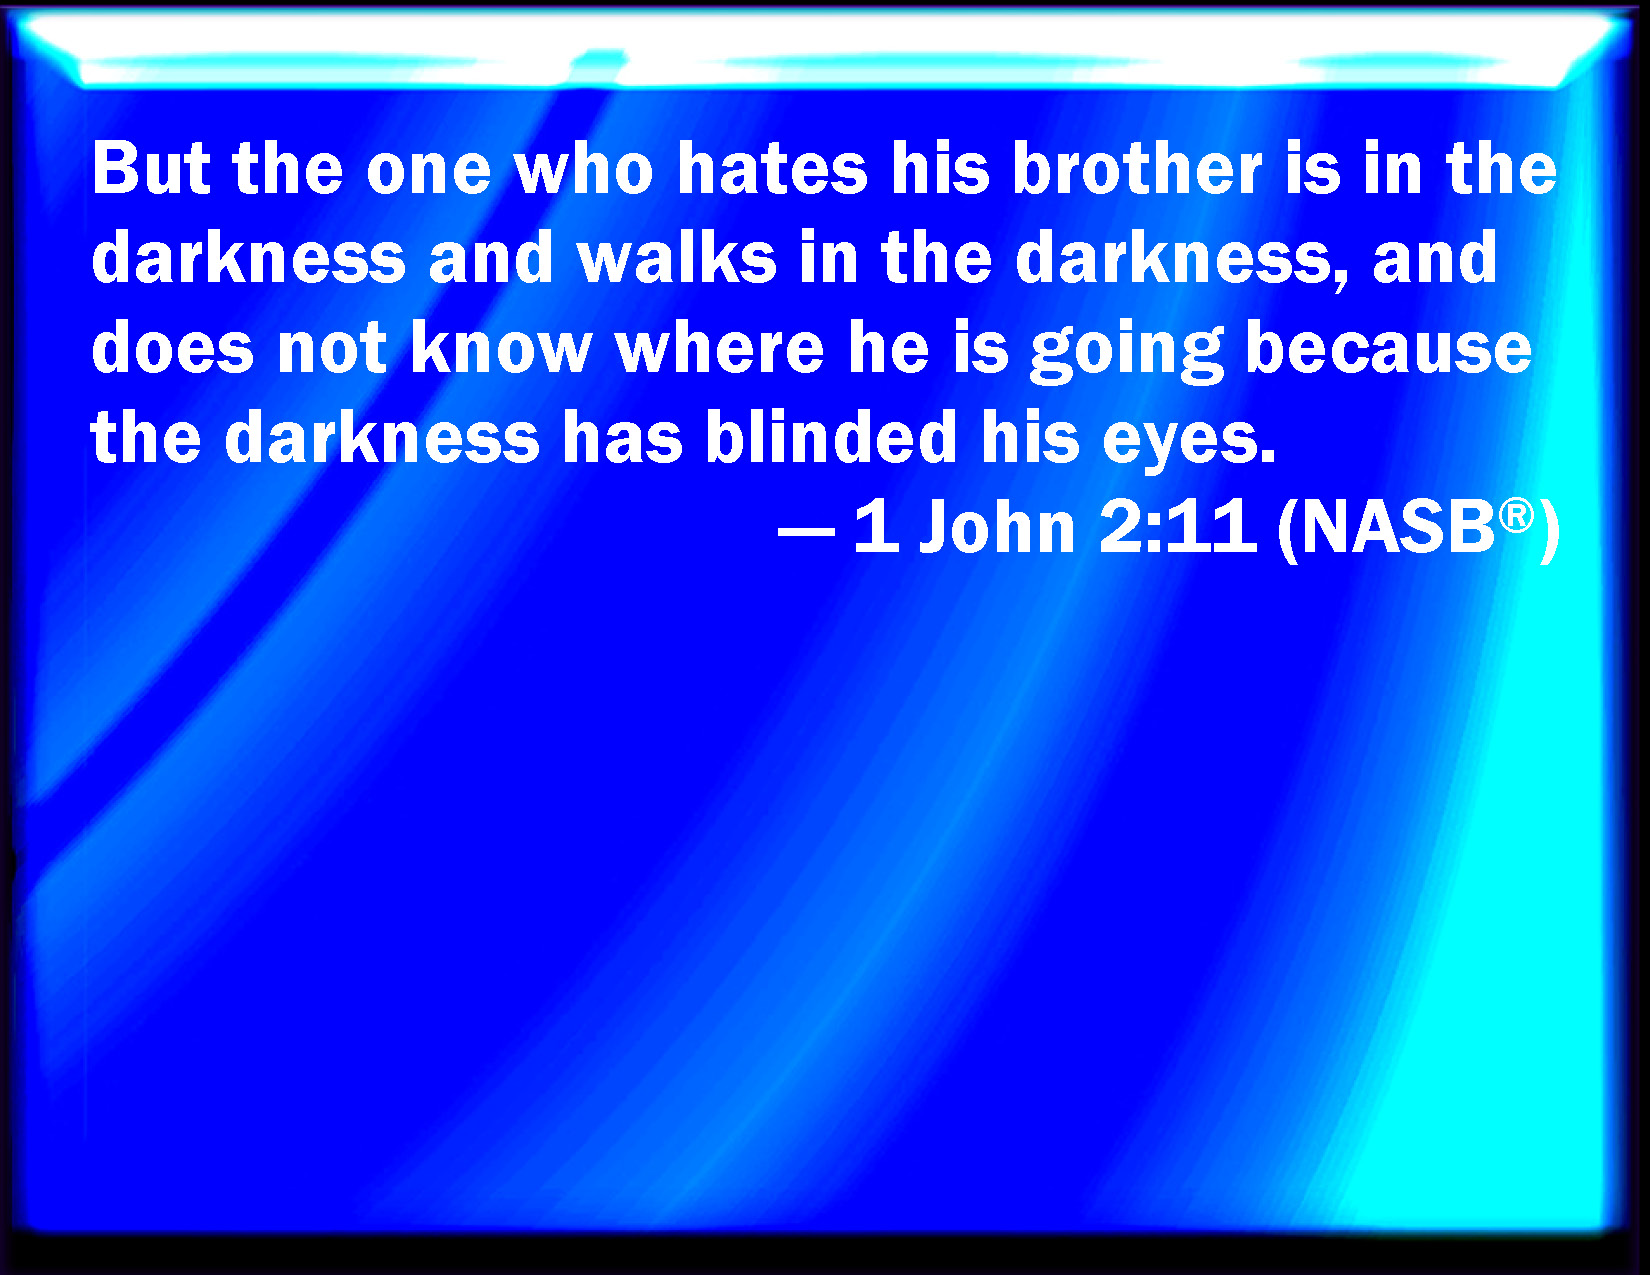 he who hates his brother walks in darkness